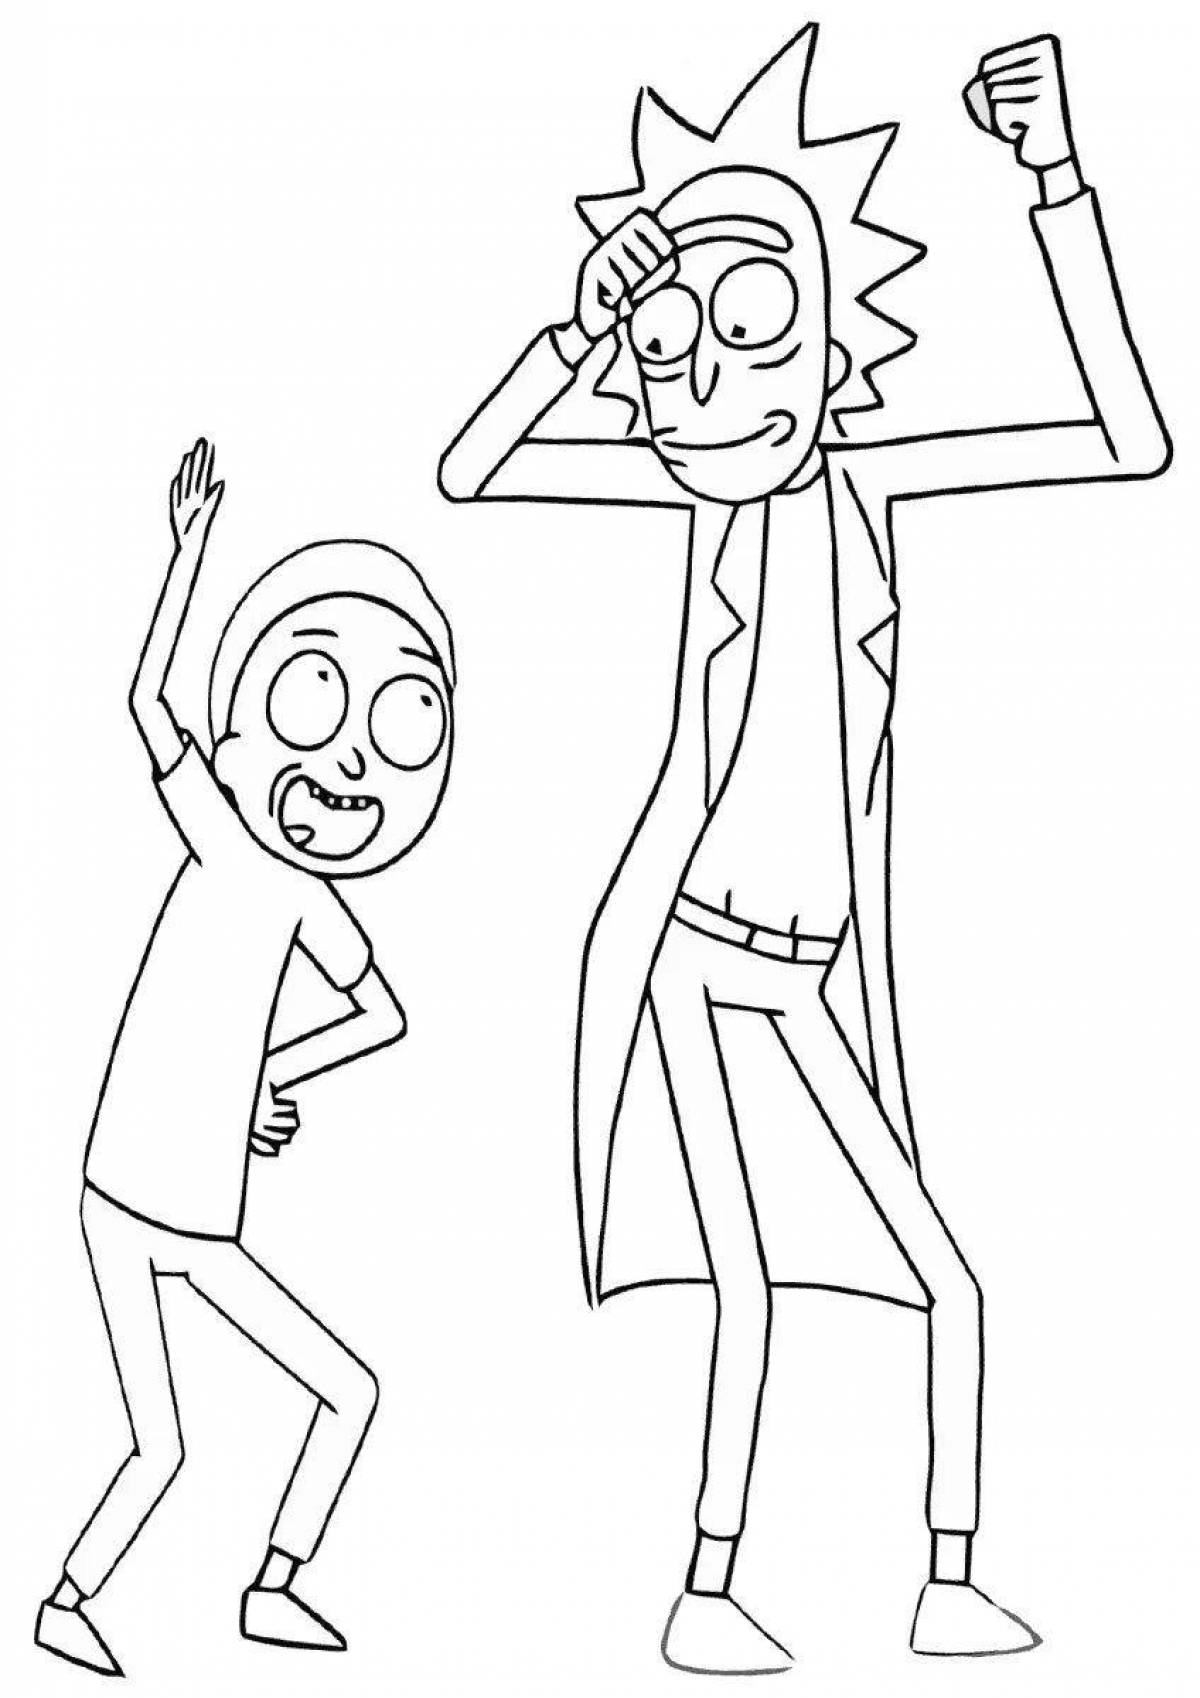 Rick coloring pages with crazy color